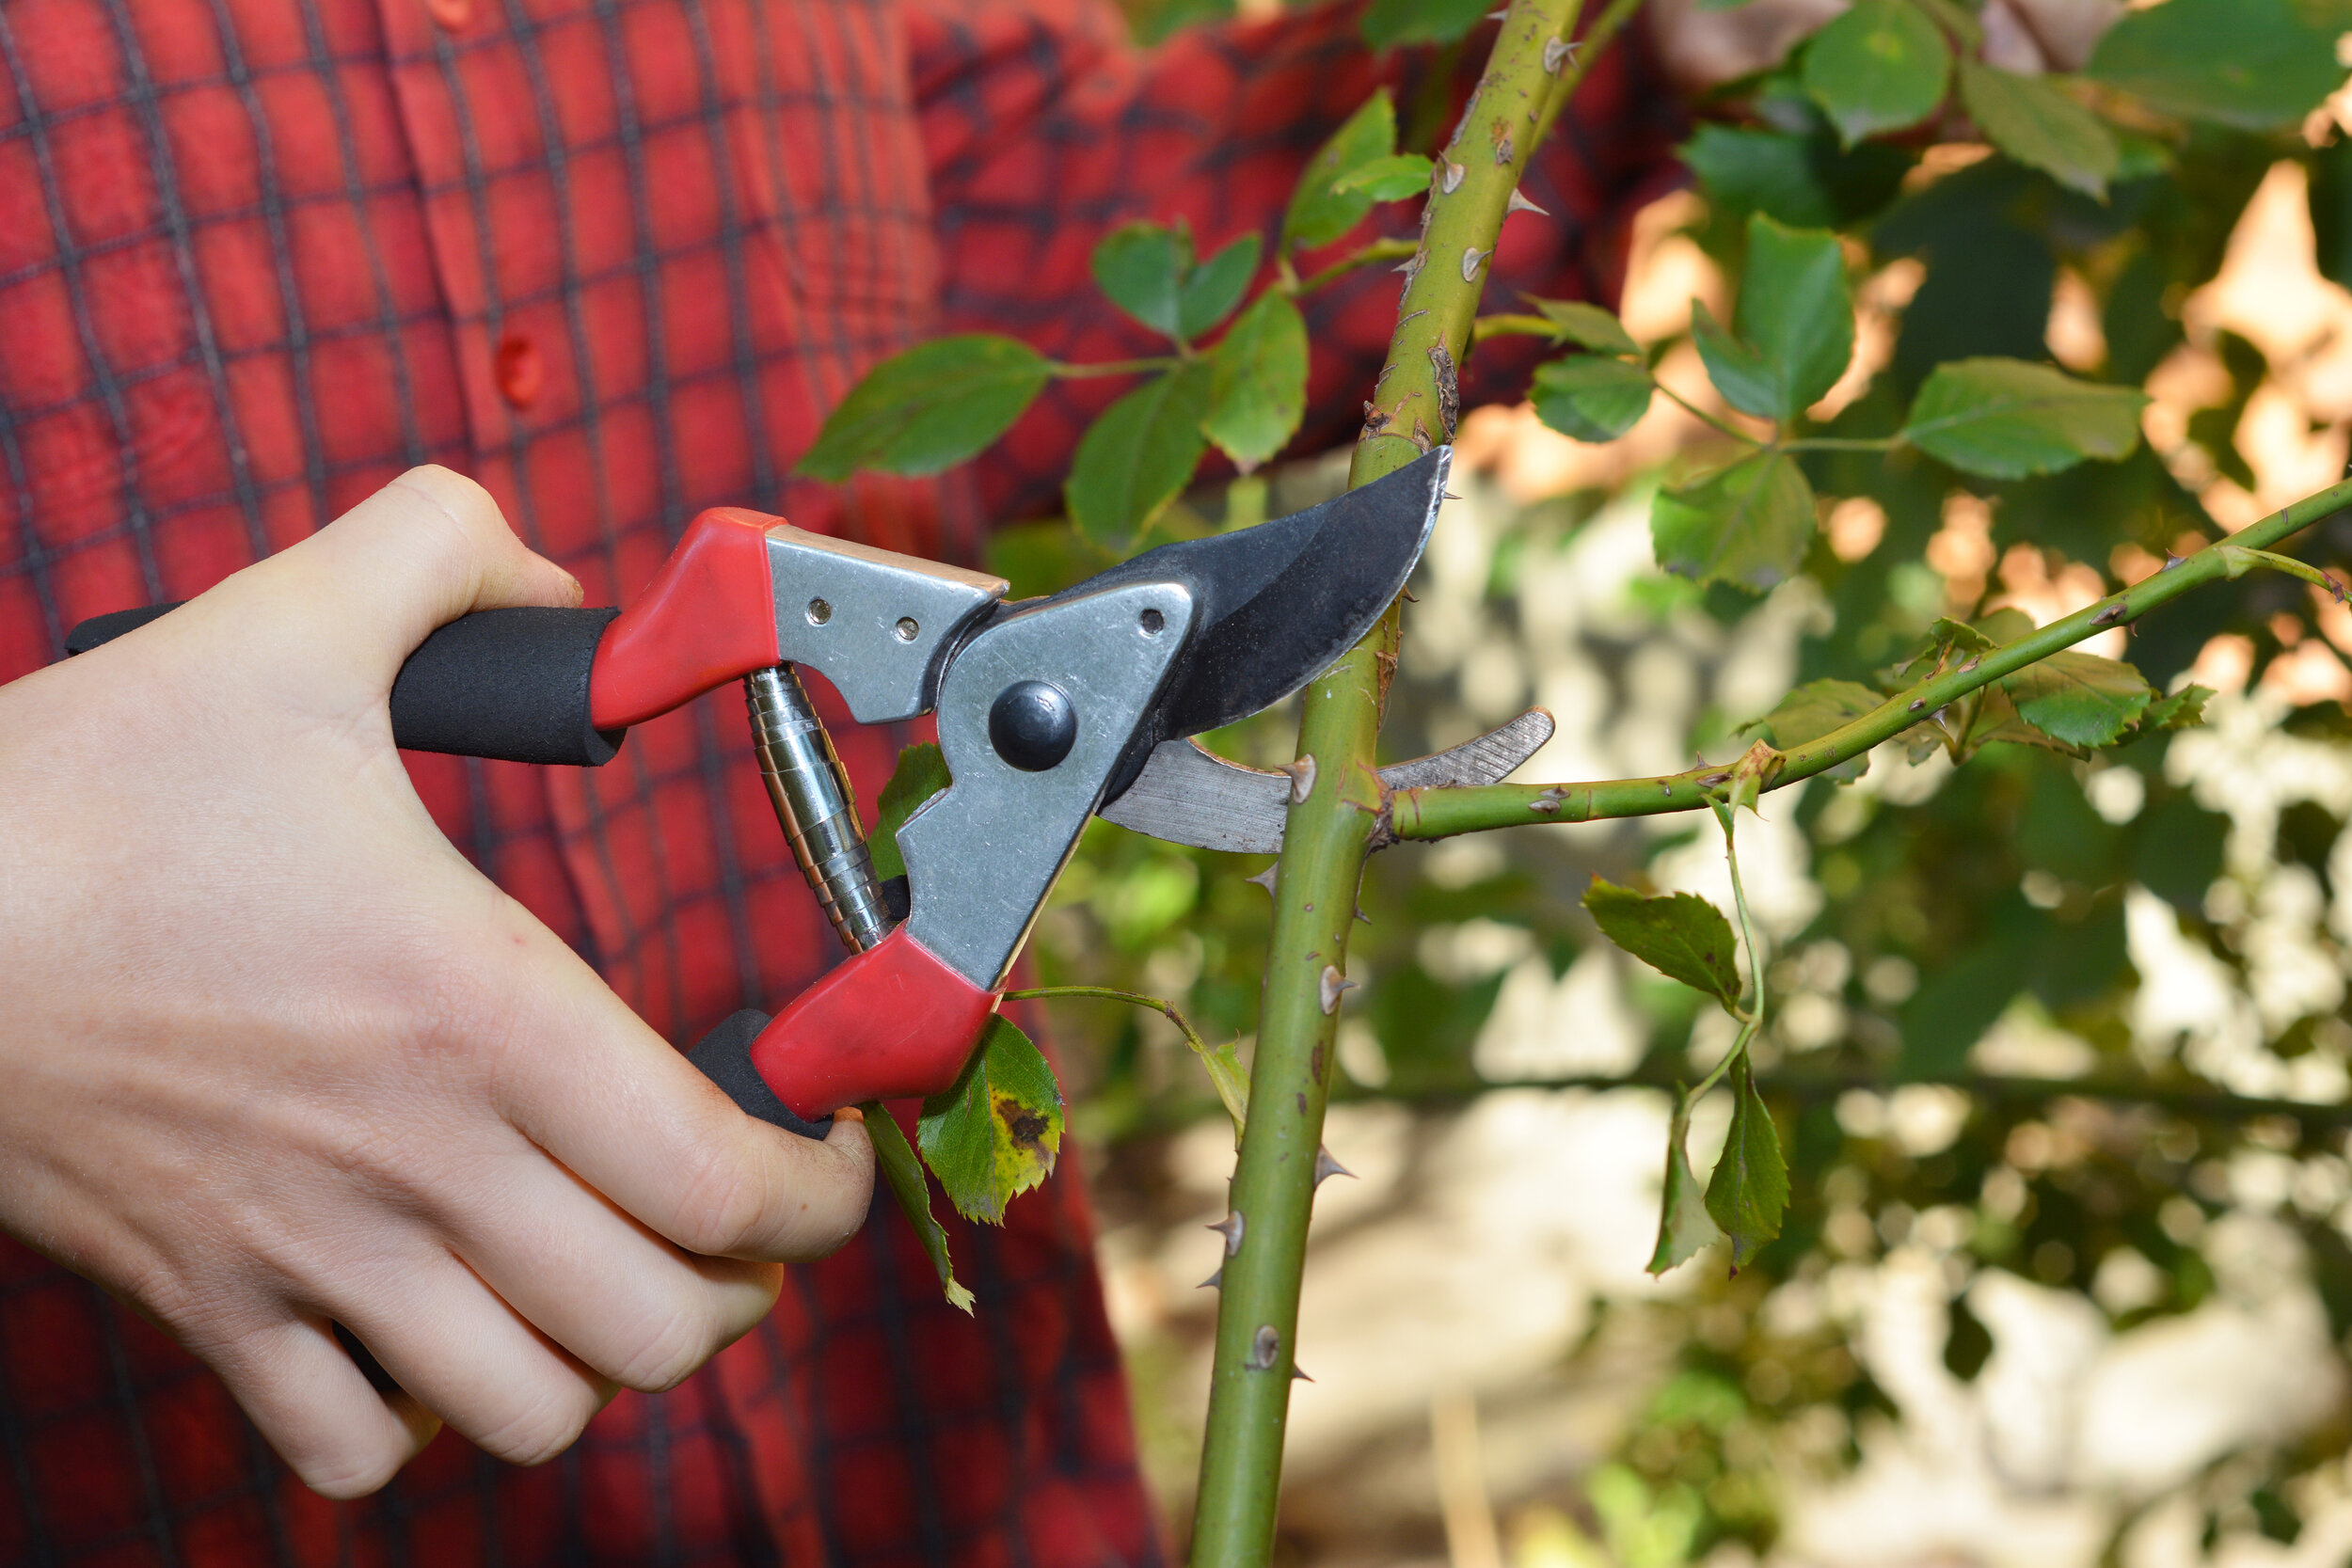 A-gardener-is-pruning-a-rose-using-pruning-shears-to-encourage-new-rose-blooms.-1295965025_4200x2800.jpeg